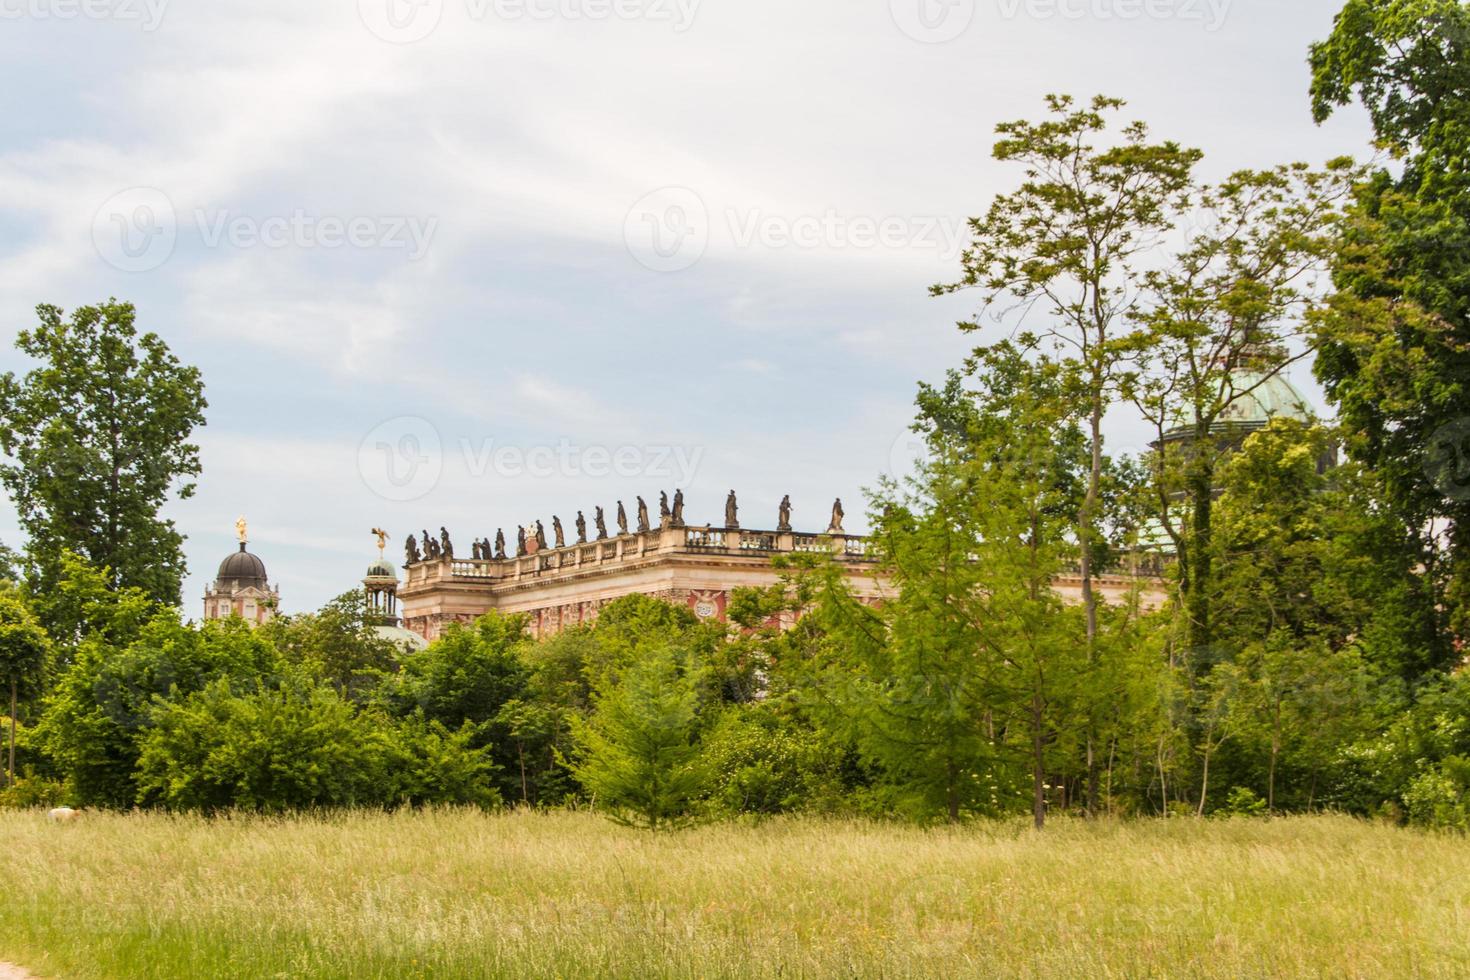 The New Palace in Potsdam Germany on UNESCO World Heritage list photo